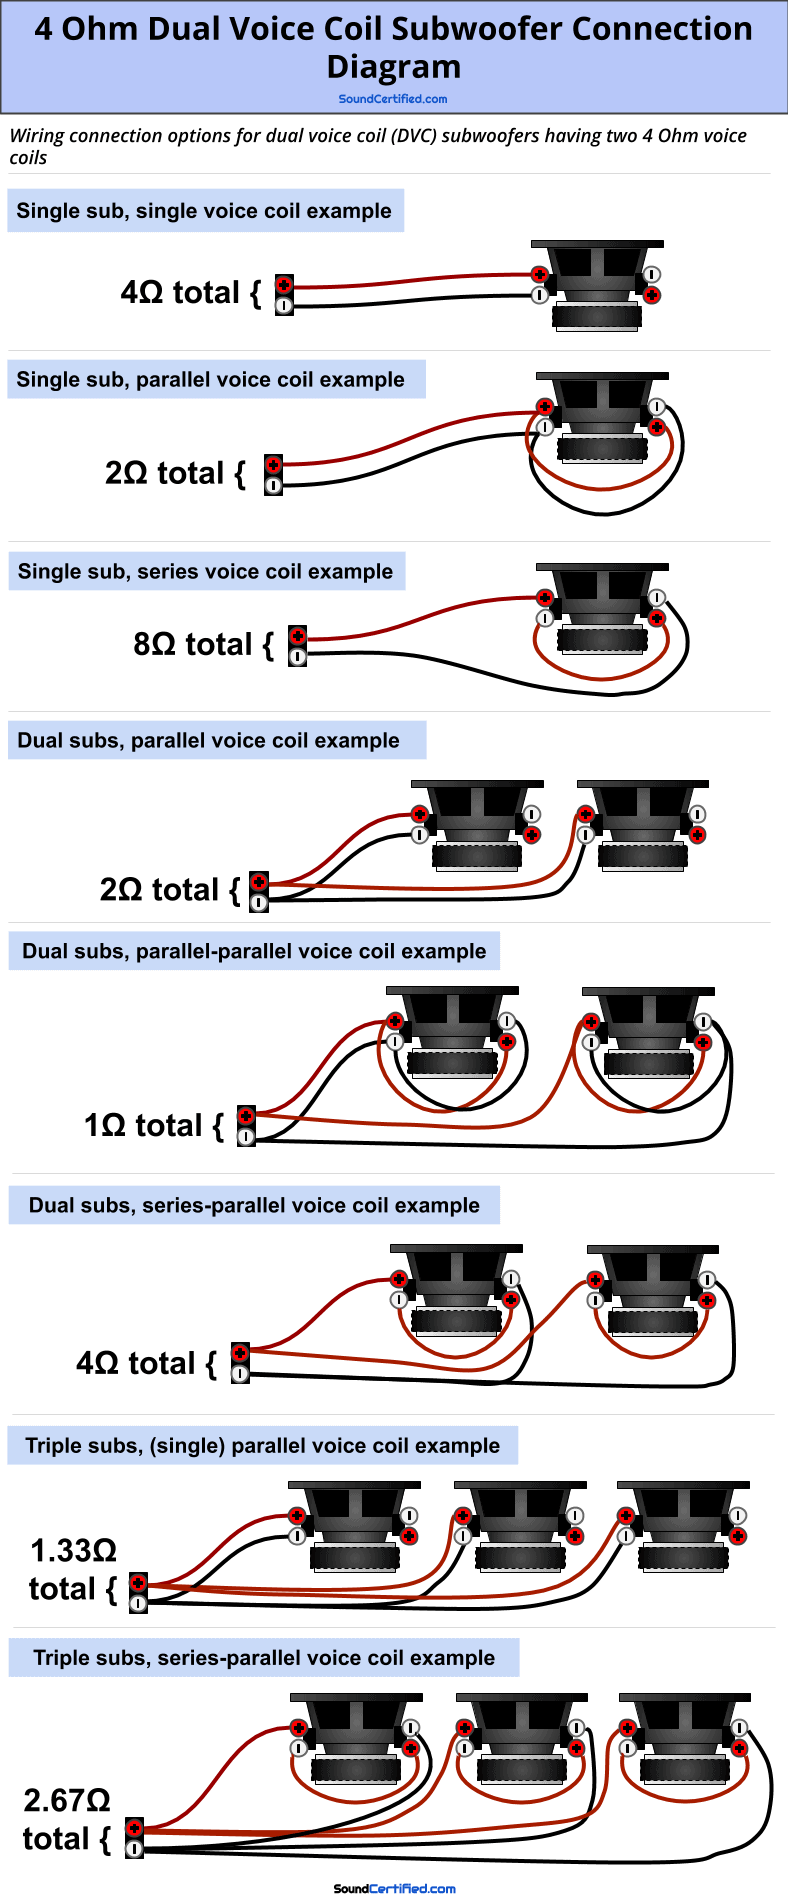 How To Wire A Dual Voice Coil Speaker + Subwoofer Wiring Diagrams  4 Ohm Sub Wiring Diagram    Sound Certified